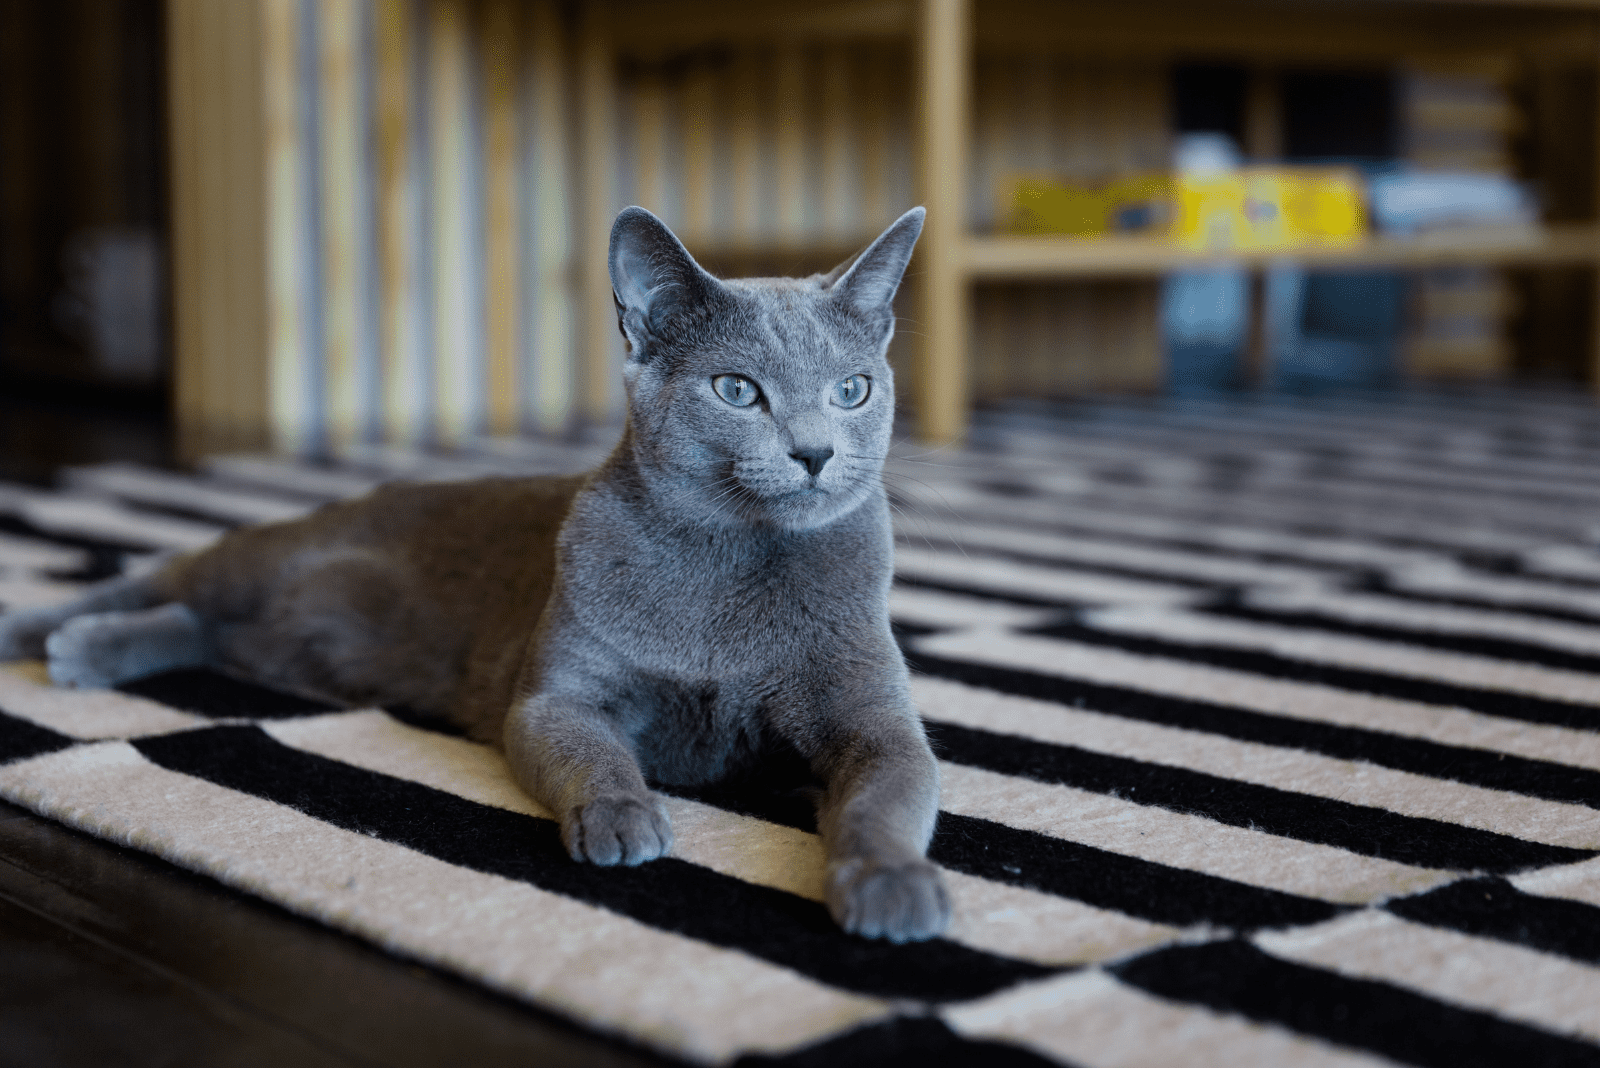 Blue cat is sitting on the floor